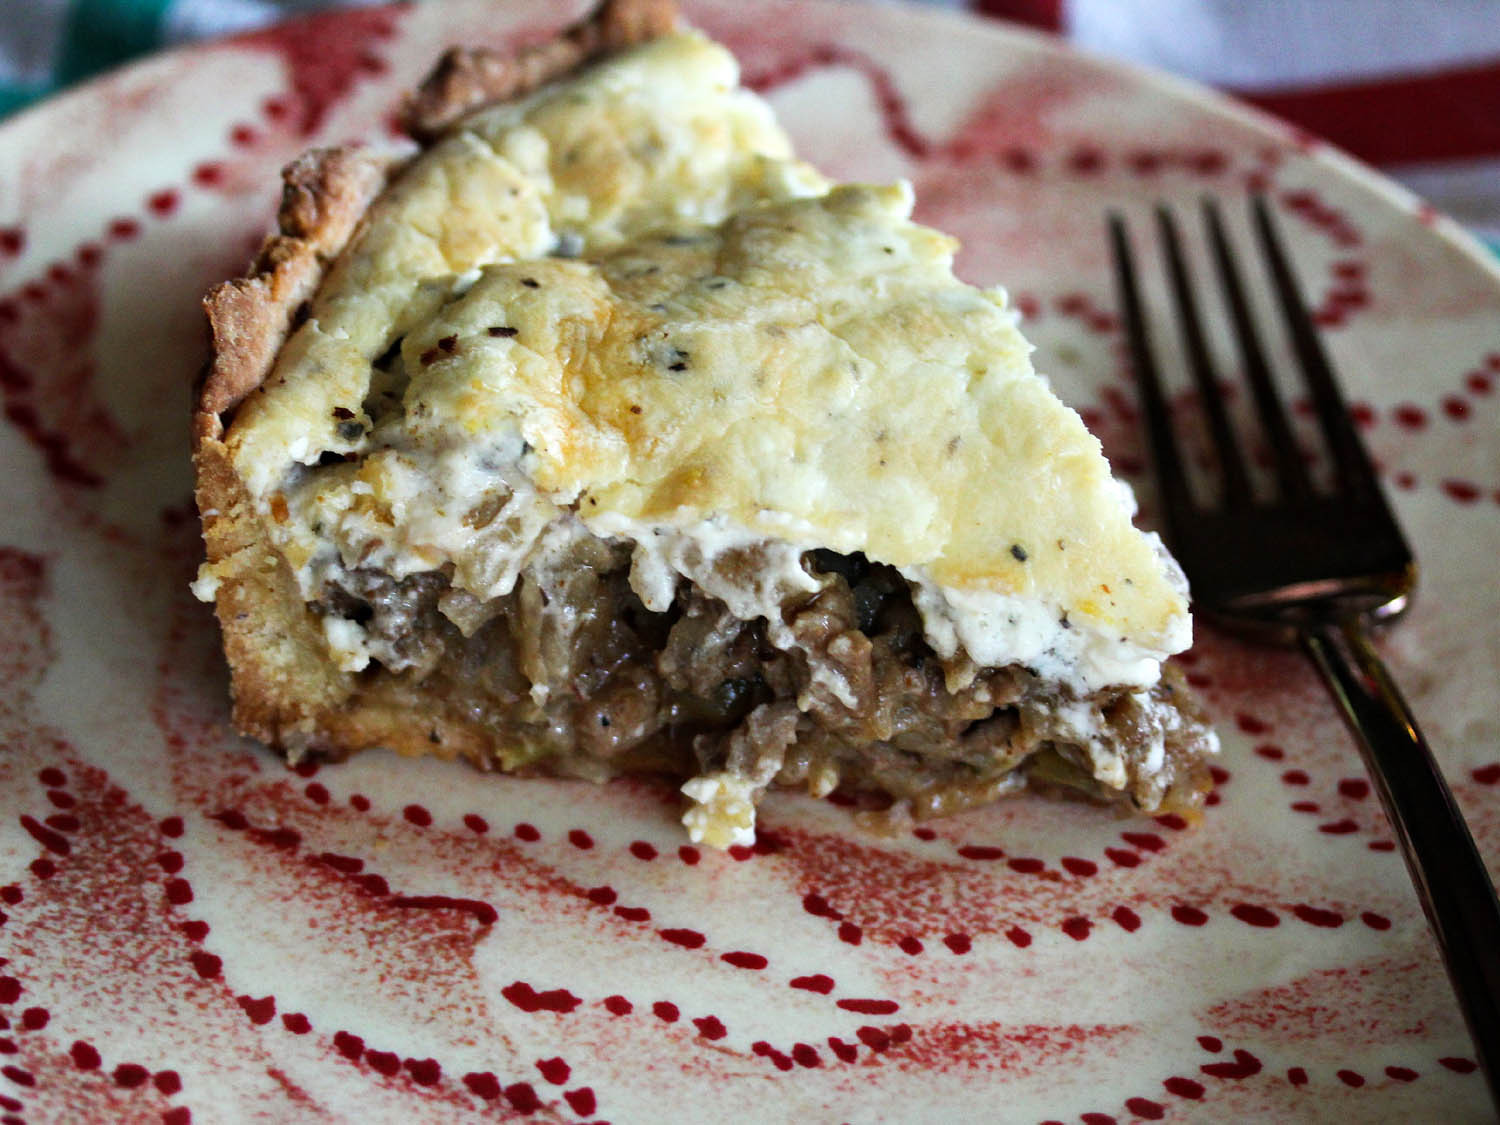 Savory Pie Recipes
 Cajun Pork and Beef Pie with Savory Cream Cheese Topping